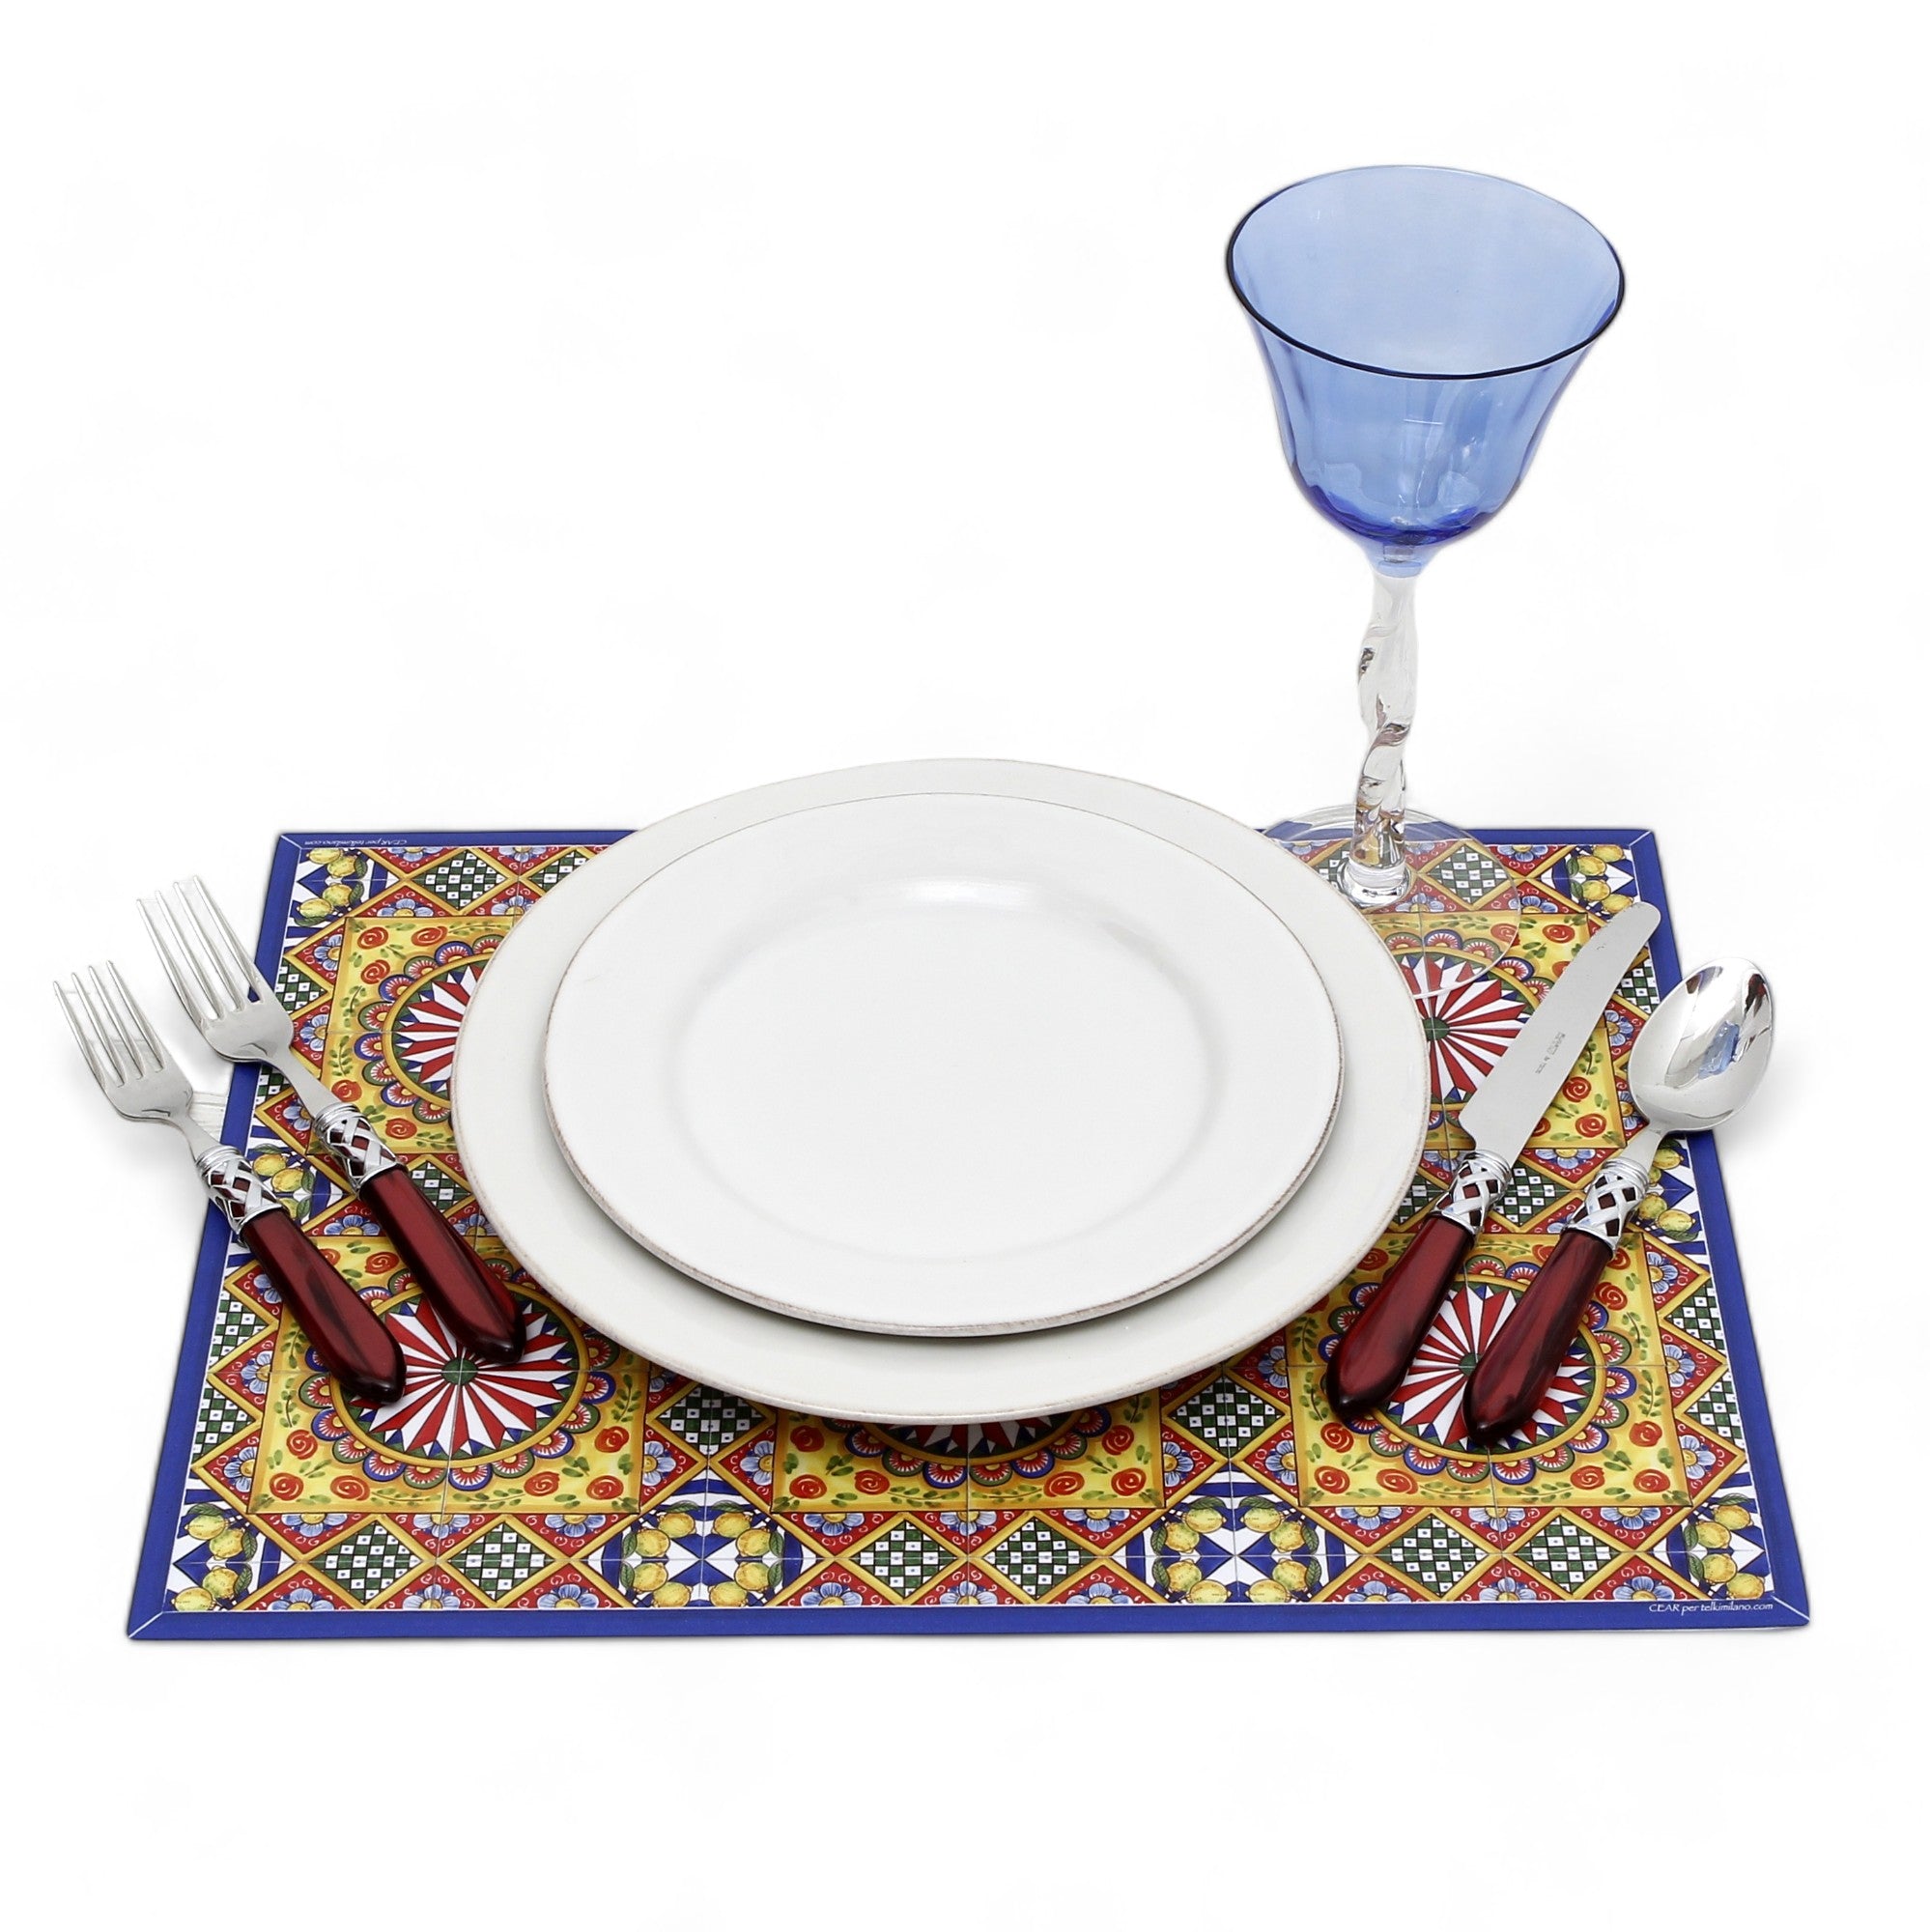 ITALIAN DREAM: Large Placemat - Stain Proof and Water Repellent PVC - Design BRONTE/A